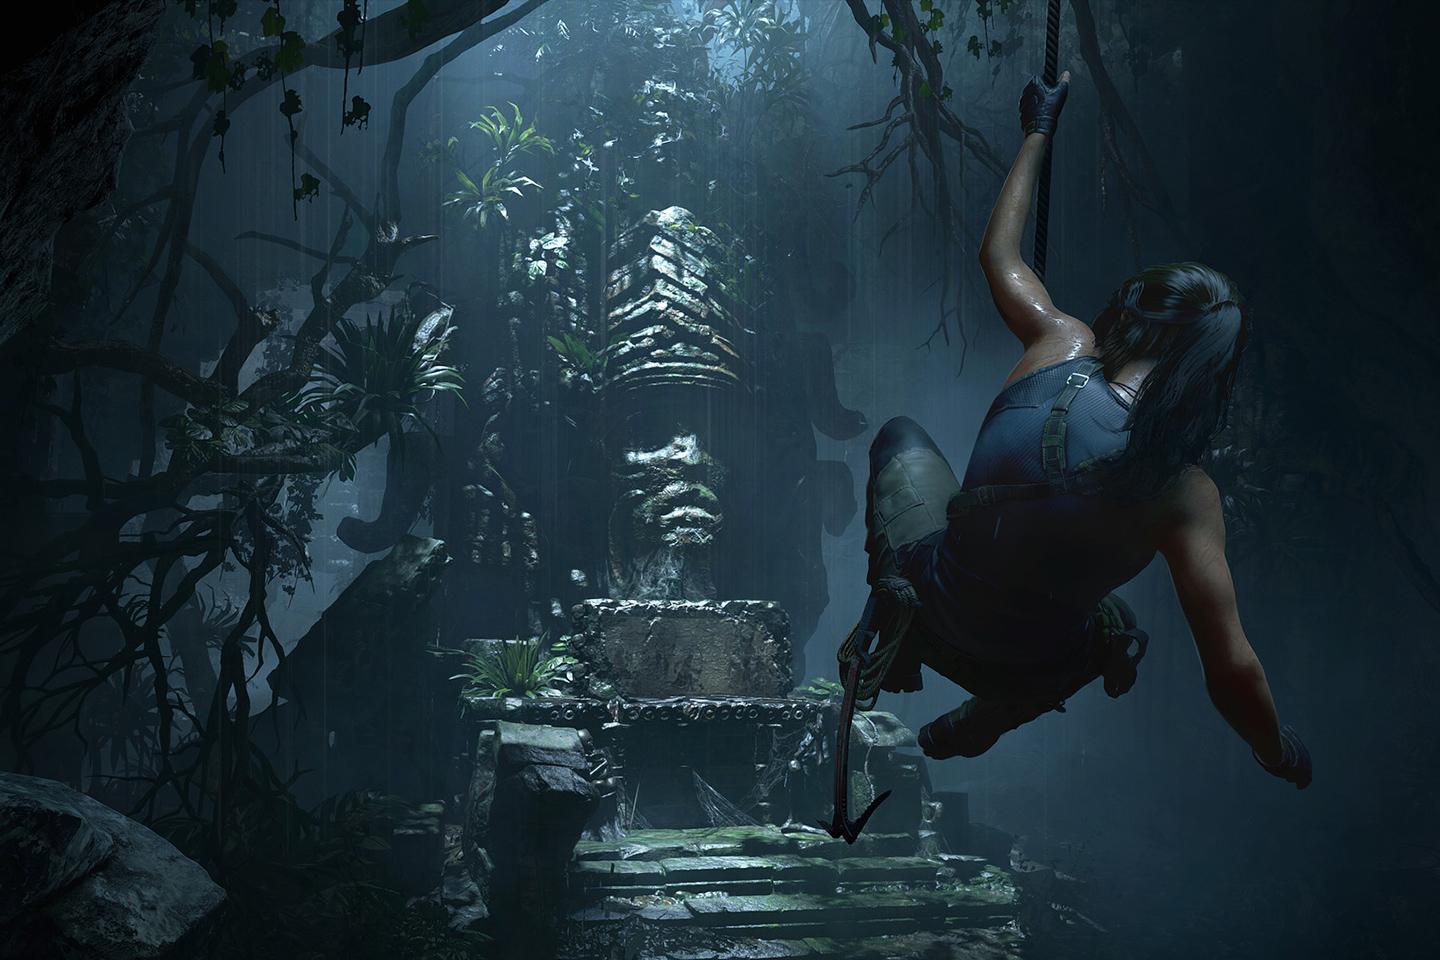 A dramatic screenshot from a Tomb Raider game showing Lara Croft rappelling down into a cavernous temple, illuminated by the ethereal light filtering through the dense jungle above.